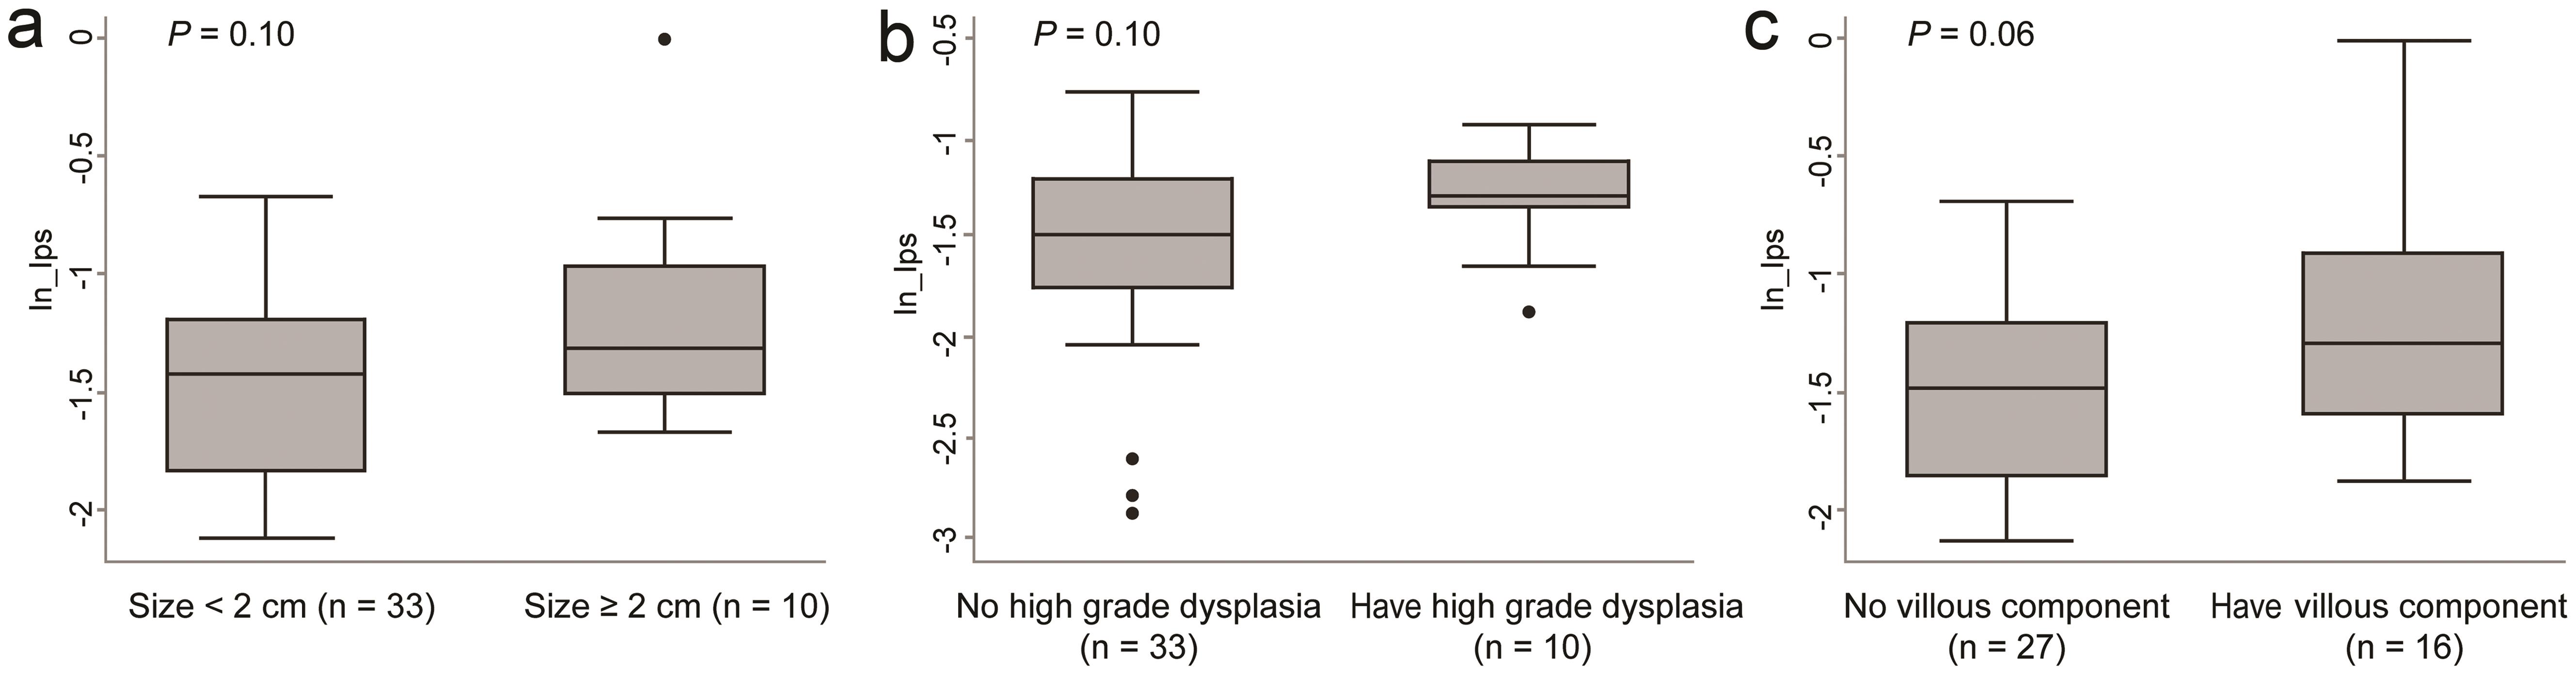 Box-plot shows the difference in transformed LPS values based on the characteristics of the adenoma.